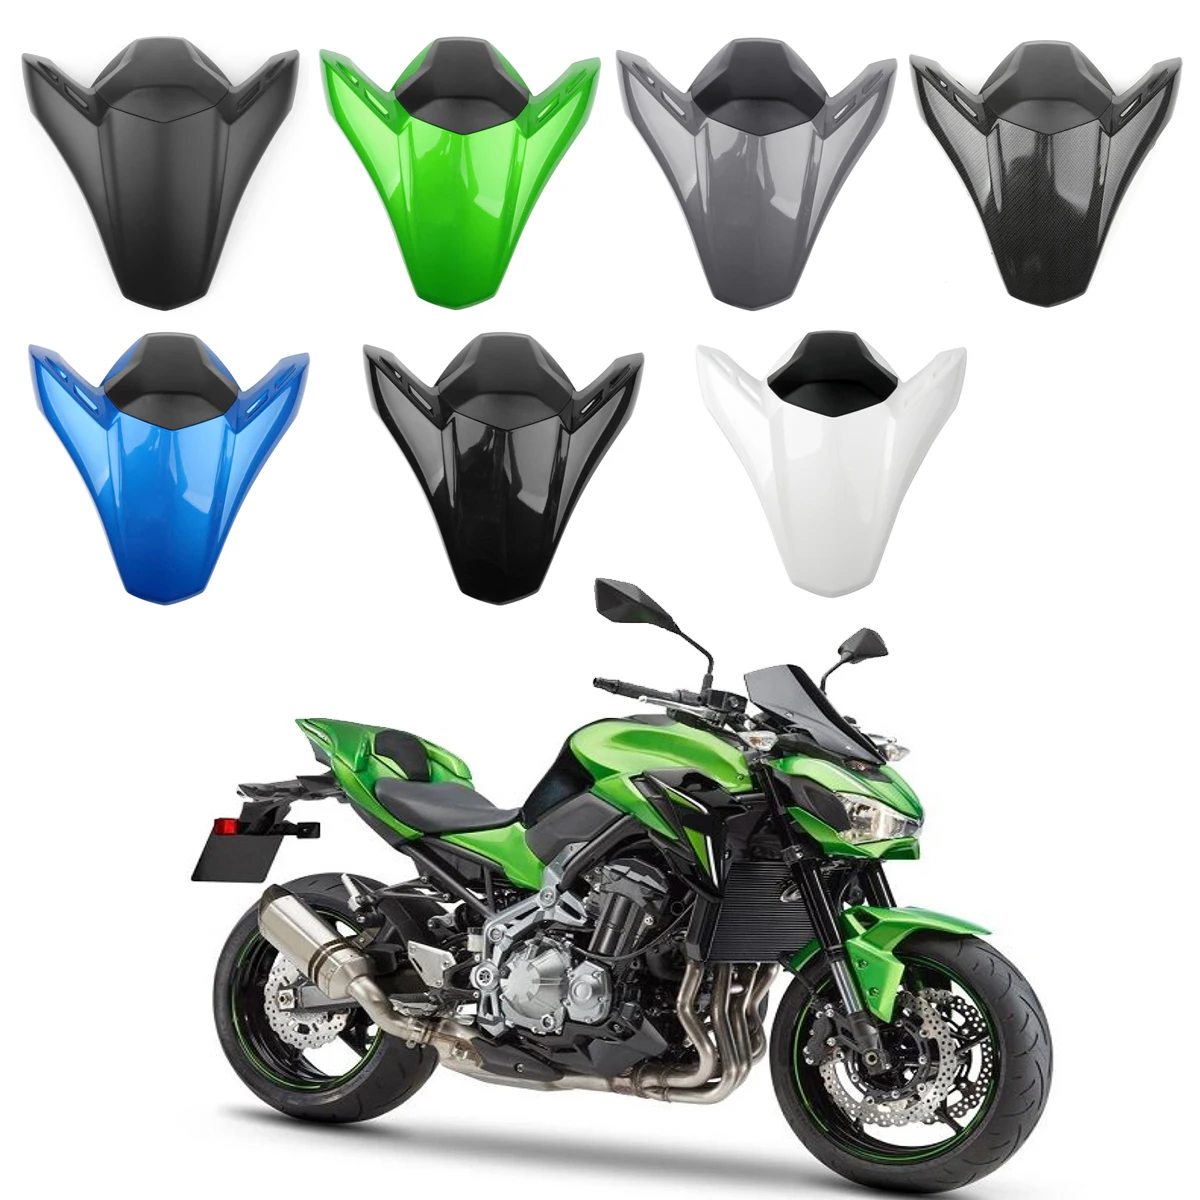 

Areyourshop ABS Rear Seat Fairing Cover Cowl Fits For Kawasaki Z900 Z ABS 2017 2018 2019 2020 Black